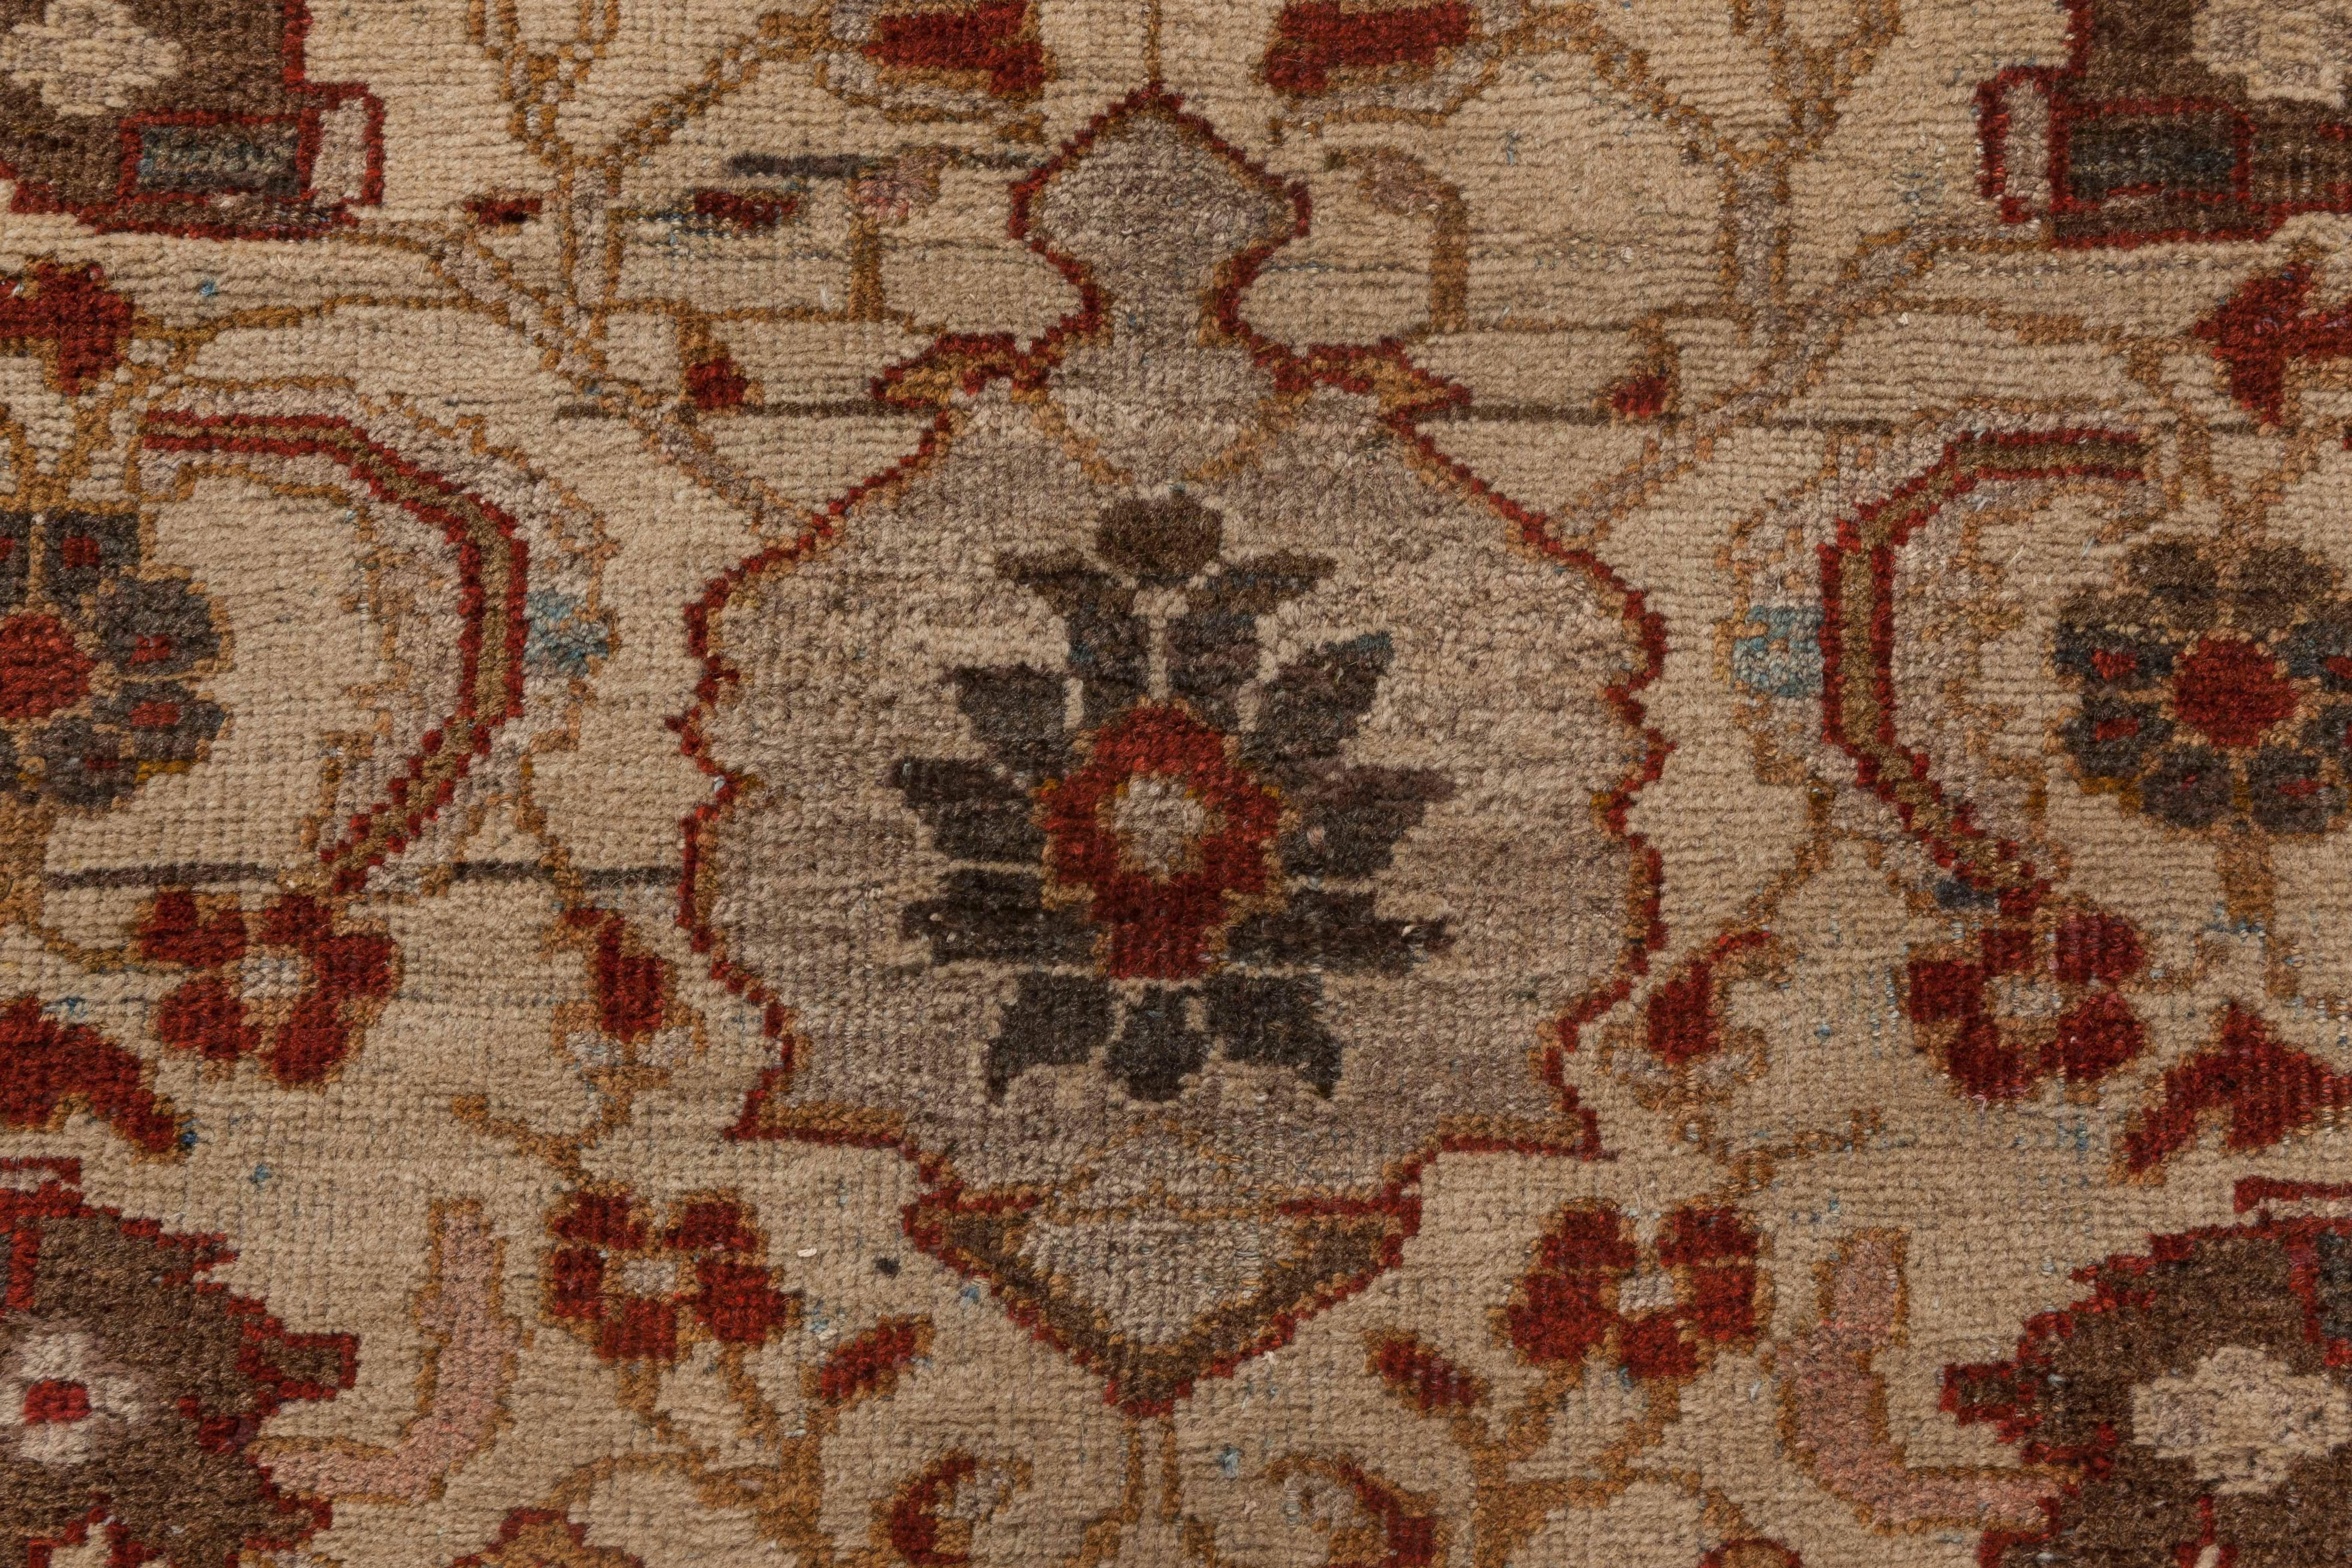 Mid-20th century Floral Persian Sultanabad hand knotted wool rug 
Size: 9'7